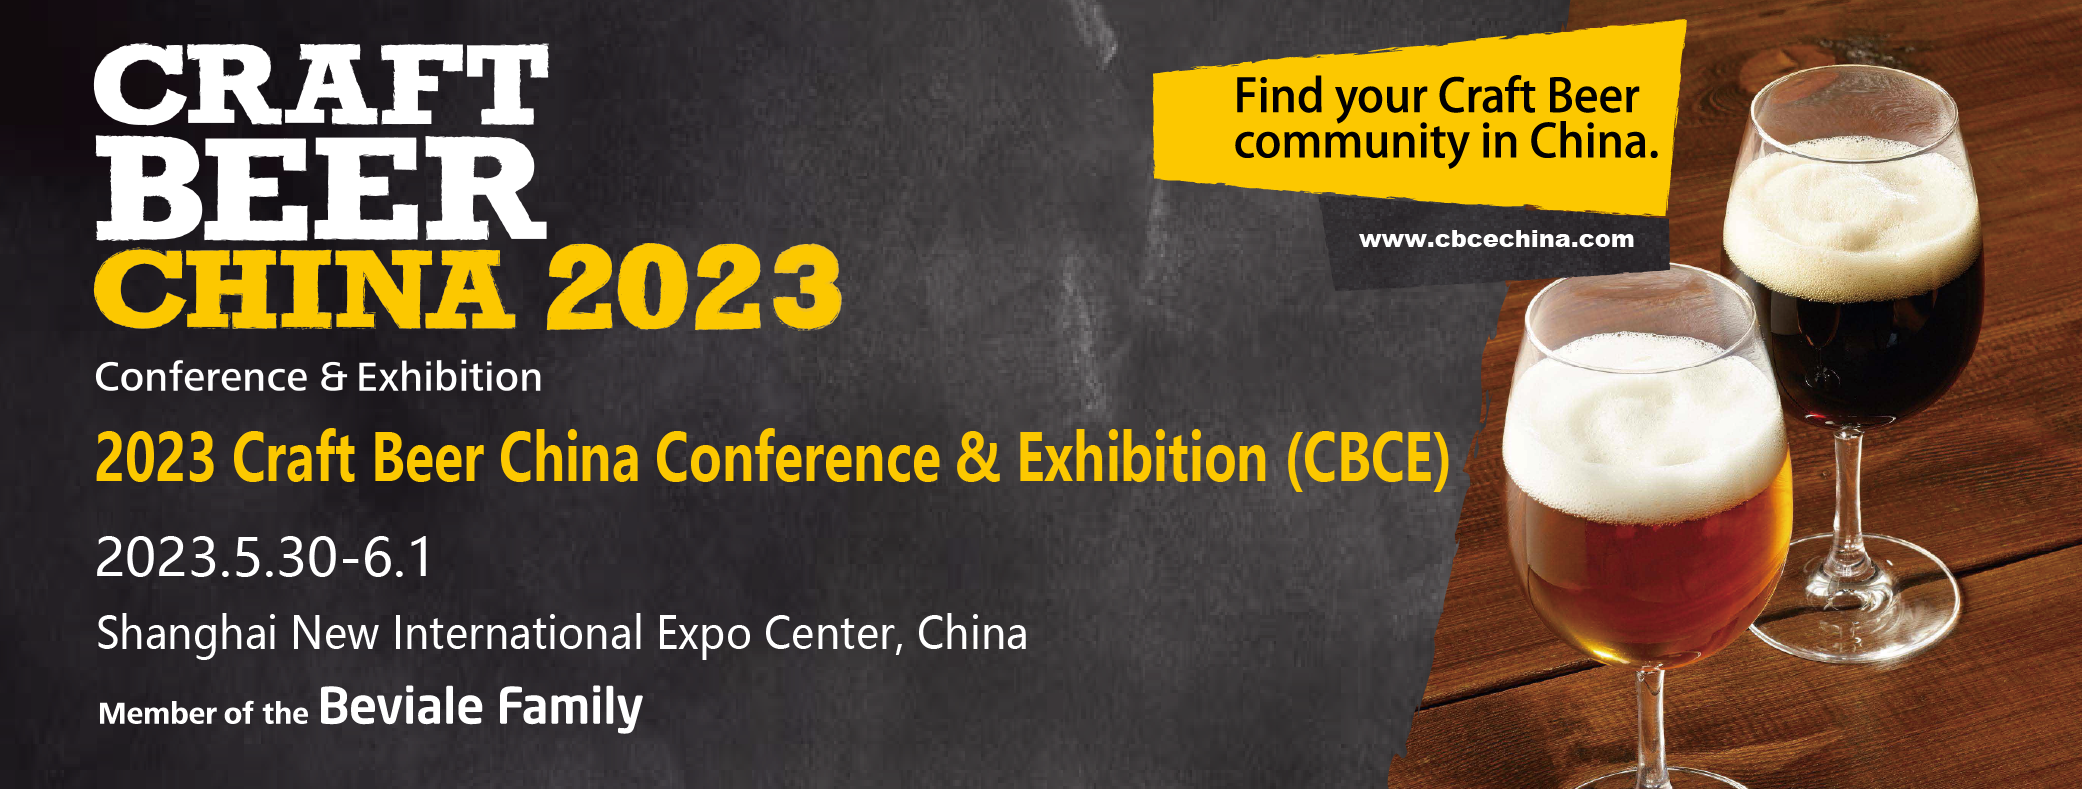 CBCE 2023丨Craft Beer ChinaCHINA CRAFT BEER Conference & Exhibition